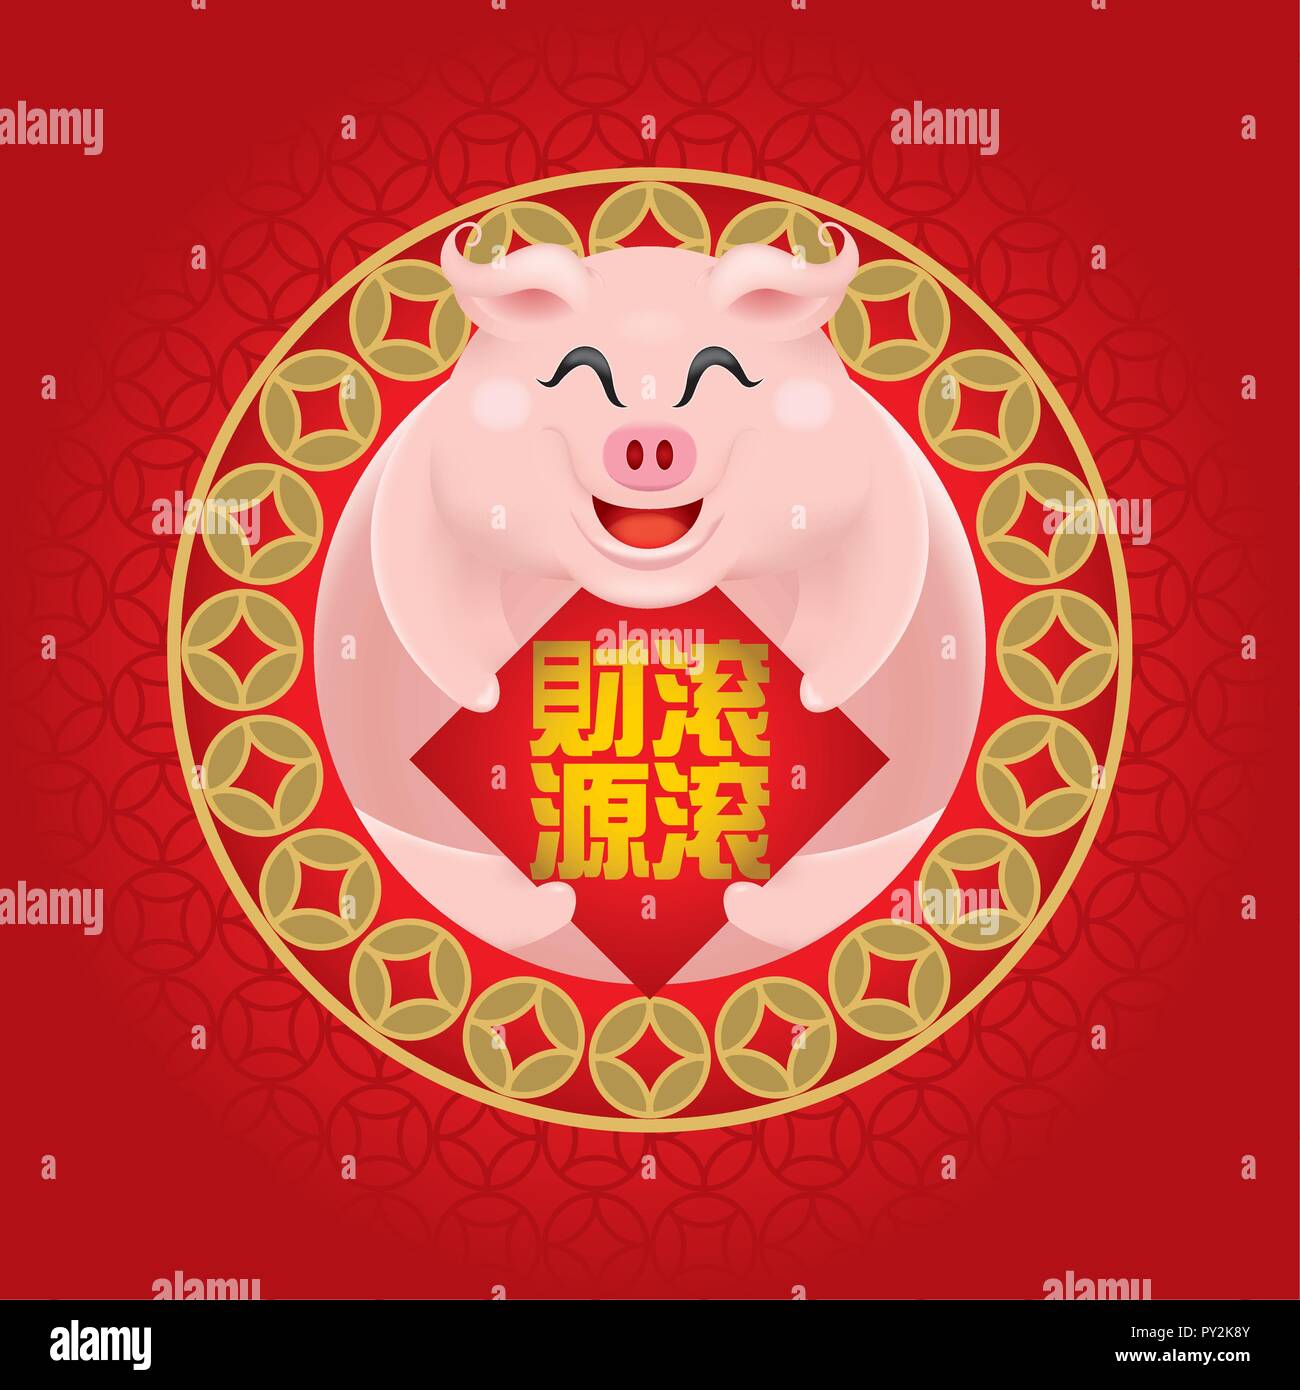 Cute little pig's image for Chinese New Year 2019, also the year of the pig. Caption: Wealth is coming. Stock Vector